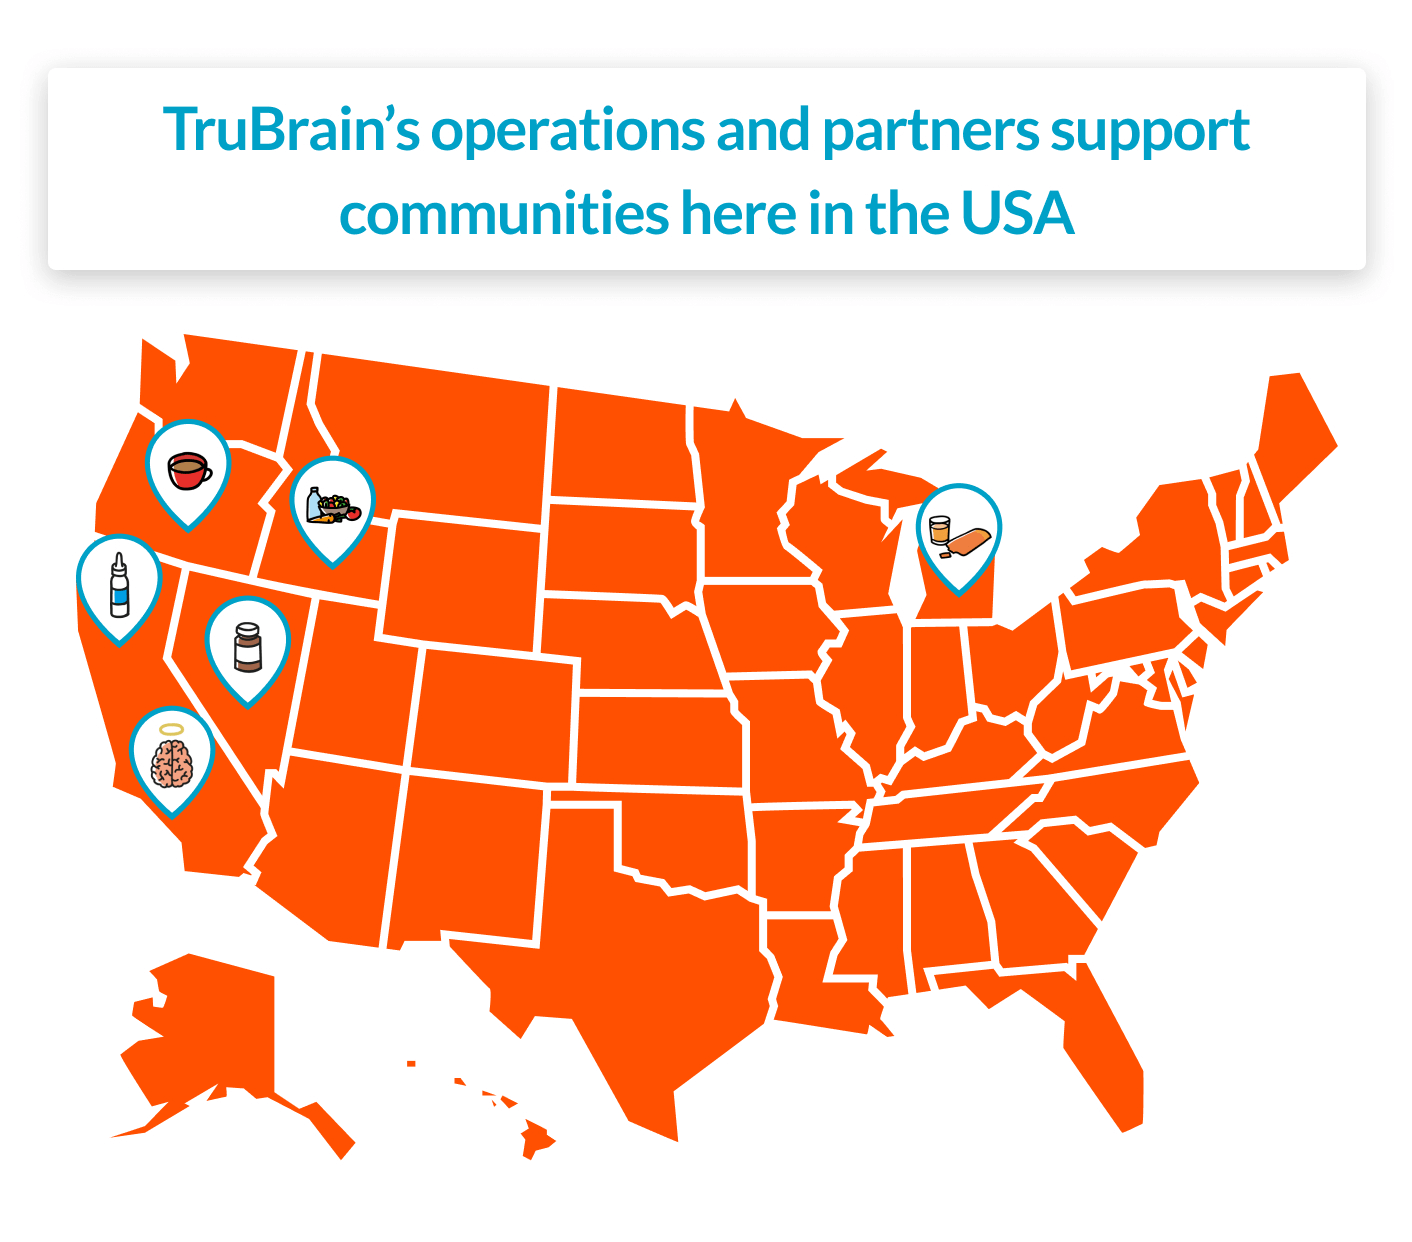 TruBrain's operations and partners support communities here in the USA